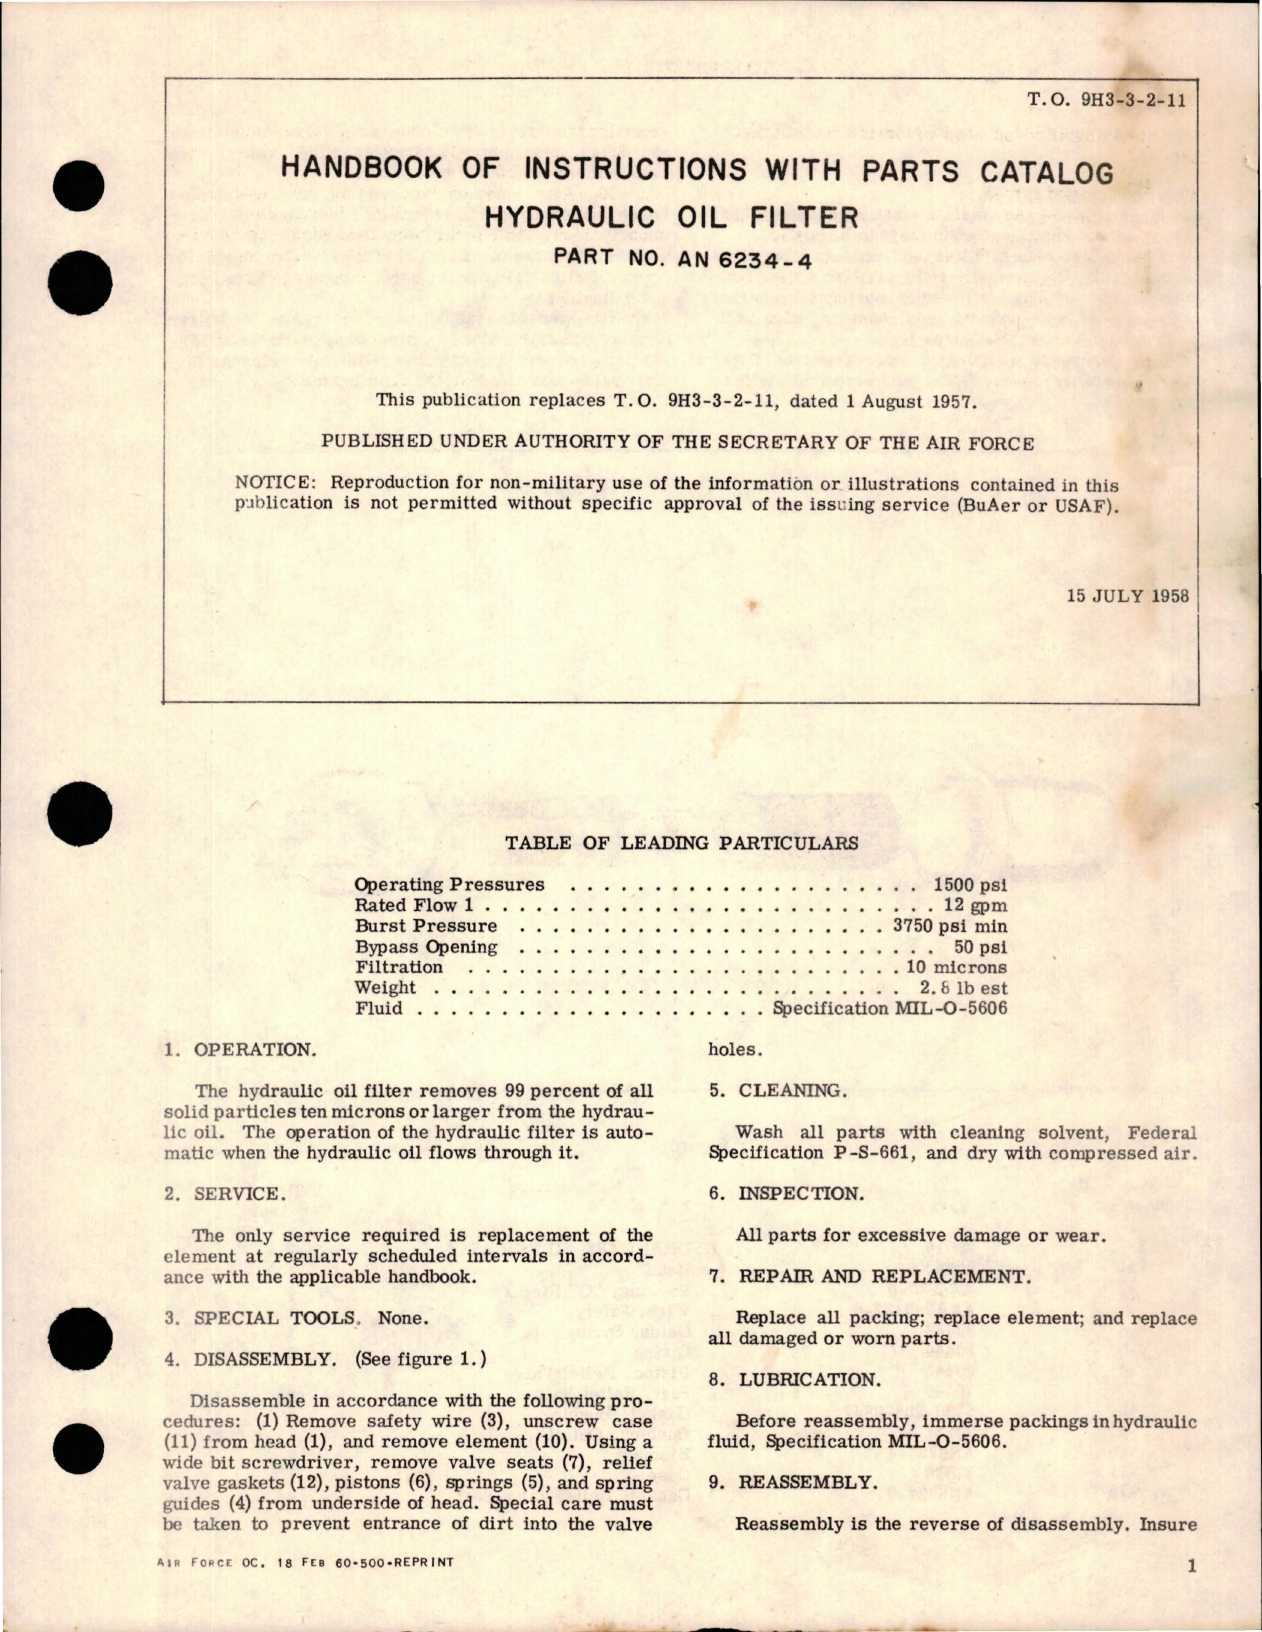 Sample page 1 from AirCorps Library document: Handbook of Instructions with Parts Catalog for Hydraulic Oil Filter - Part AN 6234-4